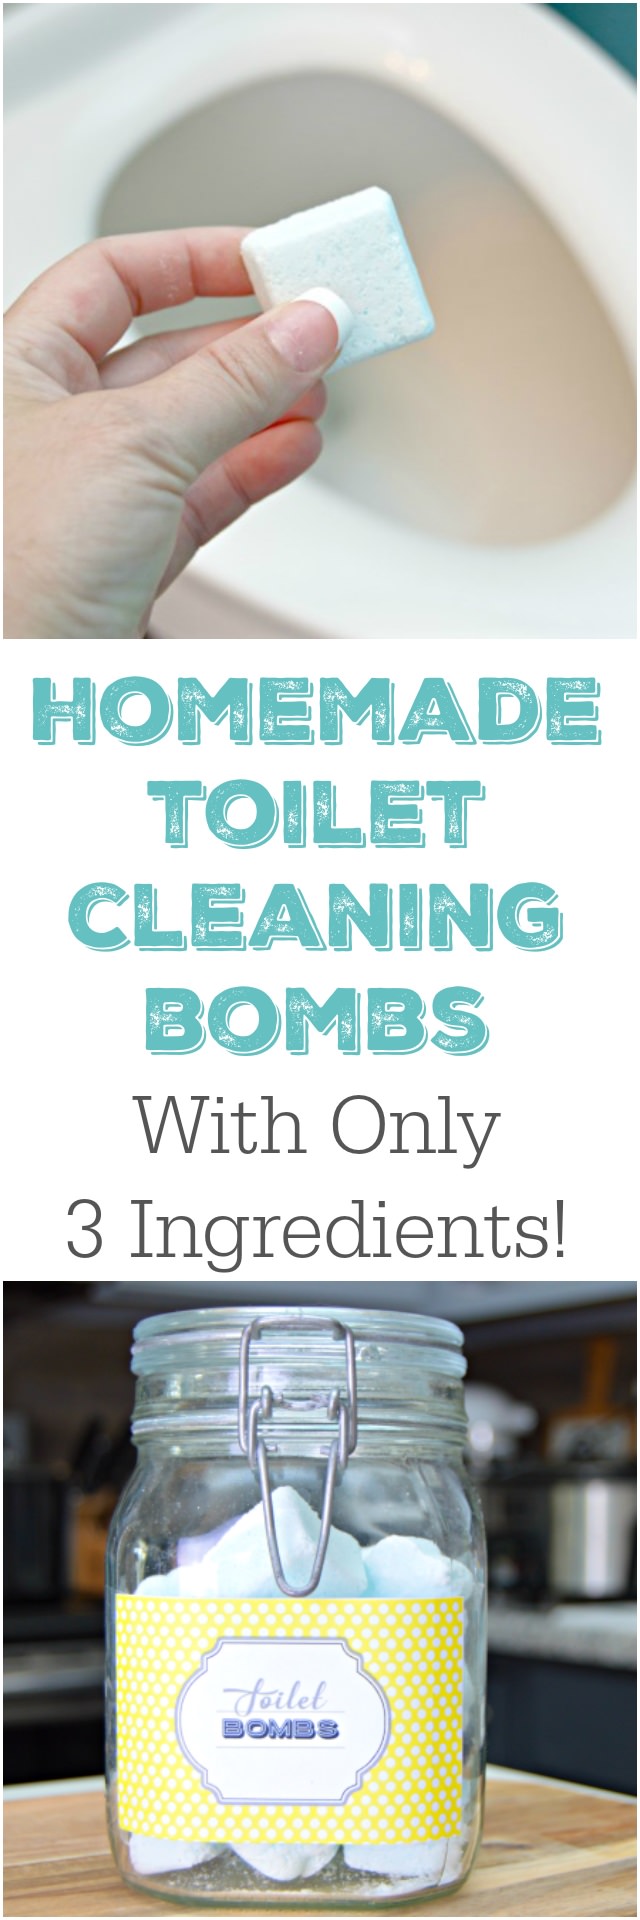 This toilet cleaning hack can be made with only 3 household ingredients and will leave your toilets fresh and clean.